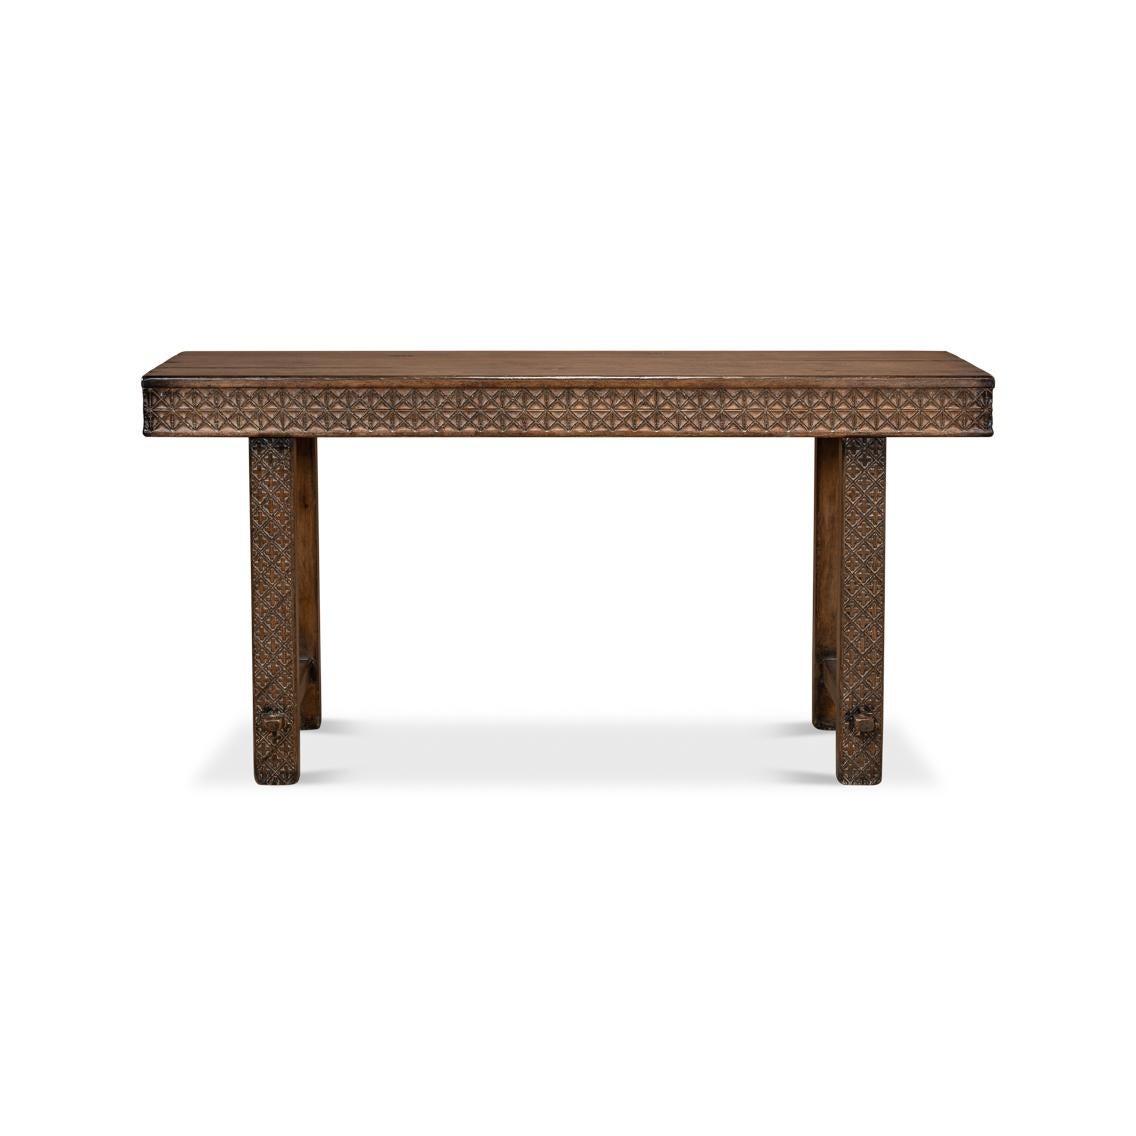 Featuring intricate geometric carvings that whisper tales of ancient craftsmanship. Fashioned in antiqued and distressed pine wood, this console table boasts a robust structure, promising to stand the test of time in both durability and